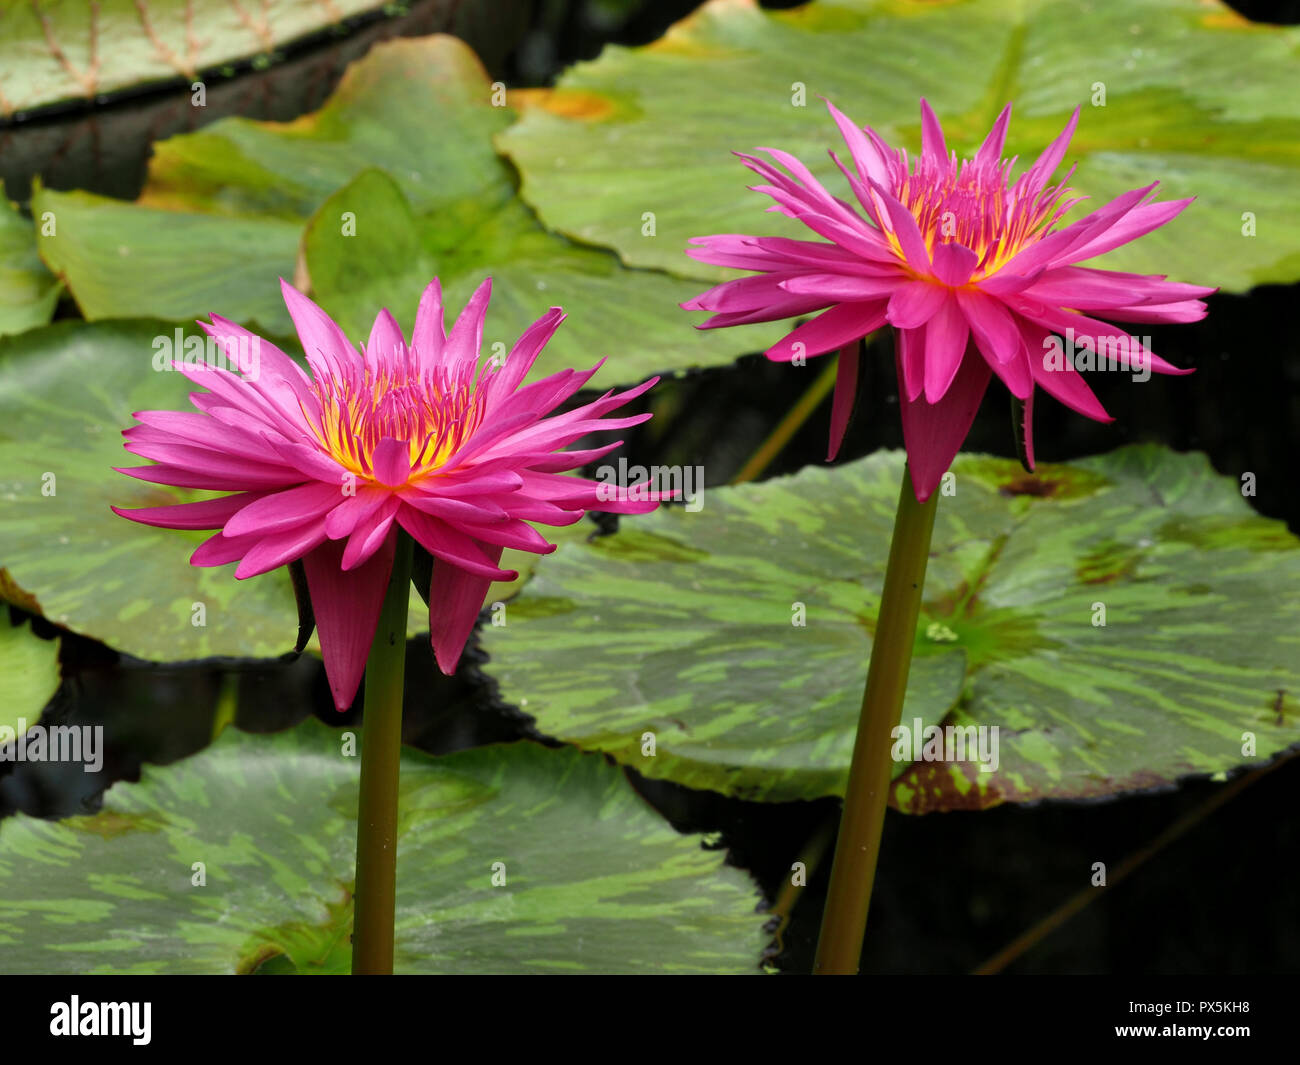 magenta petals of 2 water lily (Nymphaea sp) flowers with radiating yellow & purple stamens and variegated leaves in lily pond in London, England, UK Stock Photo